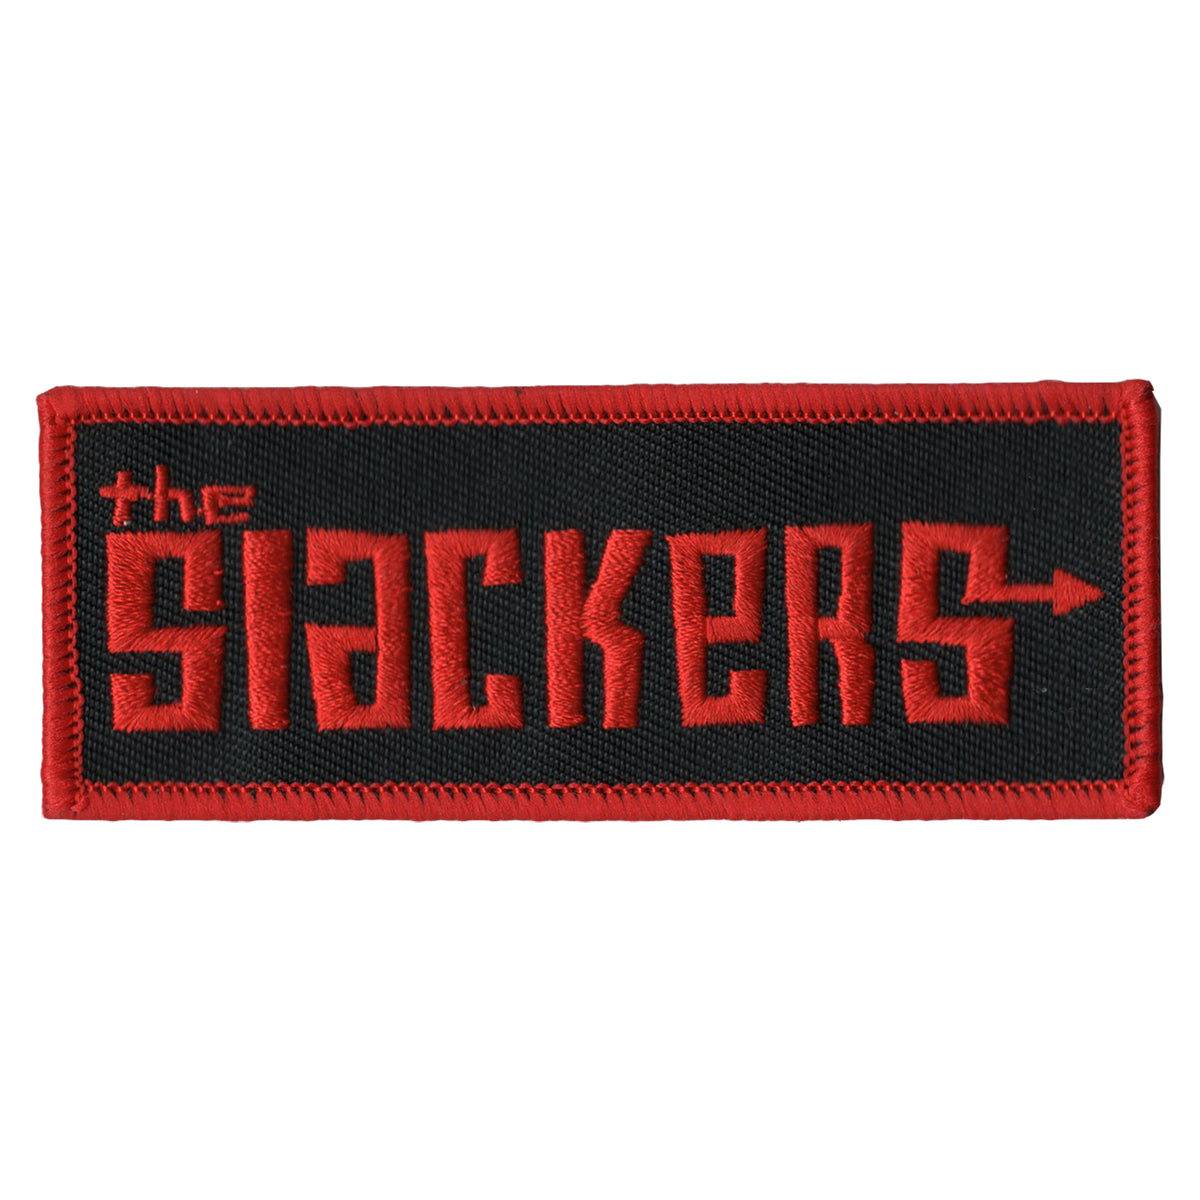 The Slackers - Text Logo - Red on Black - Patch - Embroidered - 4&quot; x 1.5&quot;